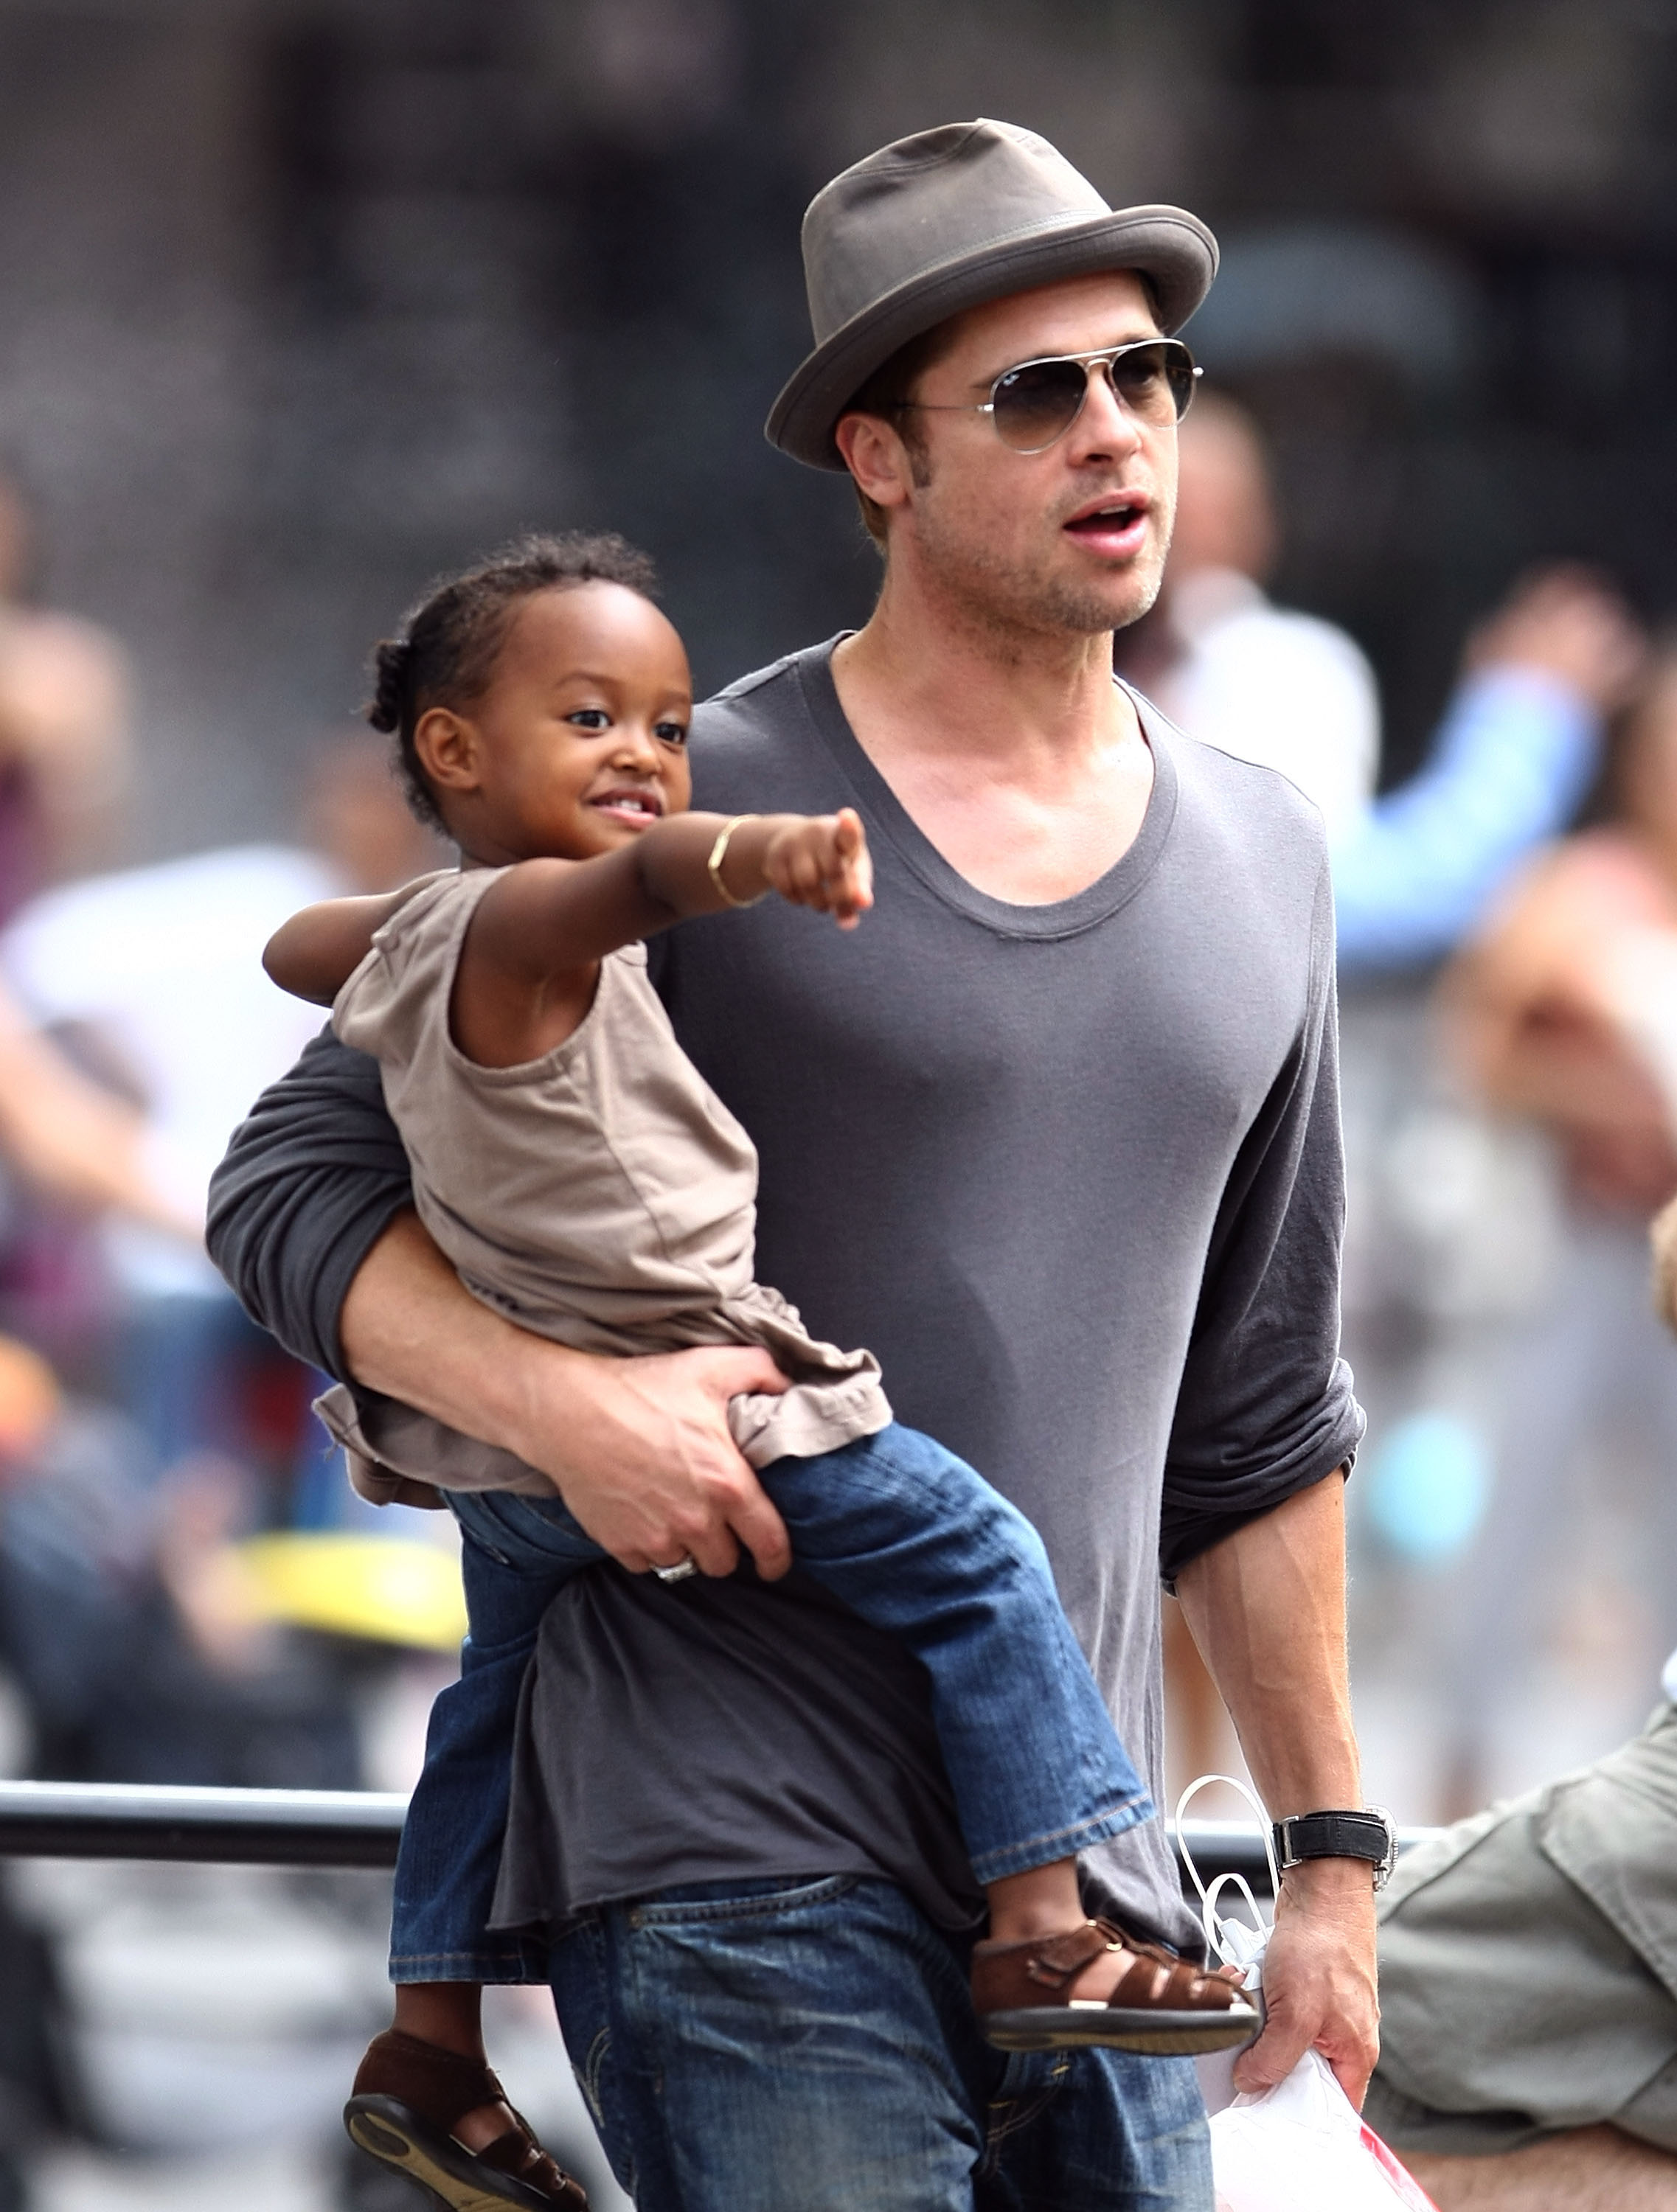 Brad Pitt and the girl at a playground in New York City on August 26, 2007 | Source: Getty Images